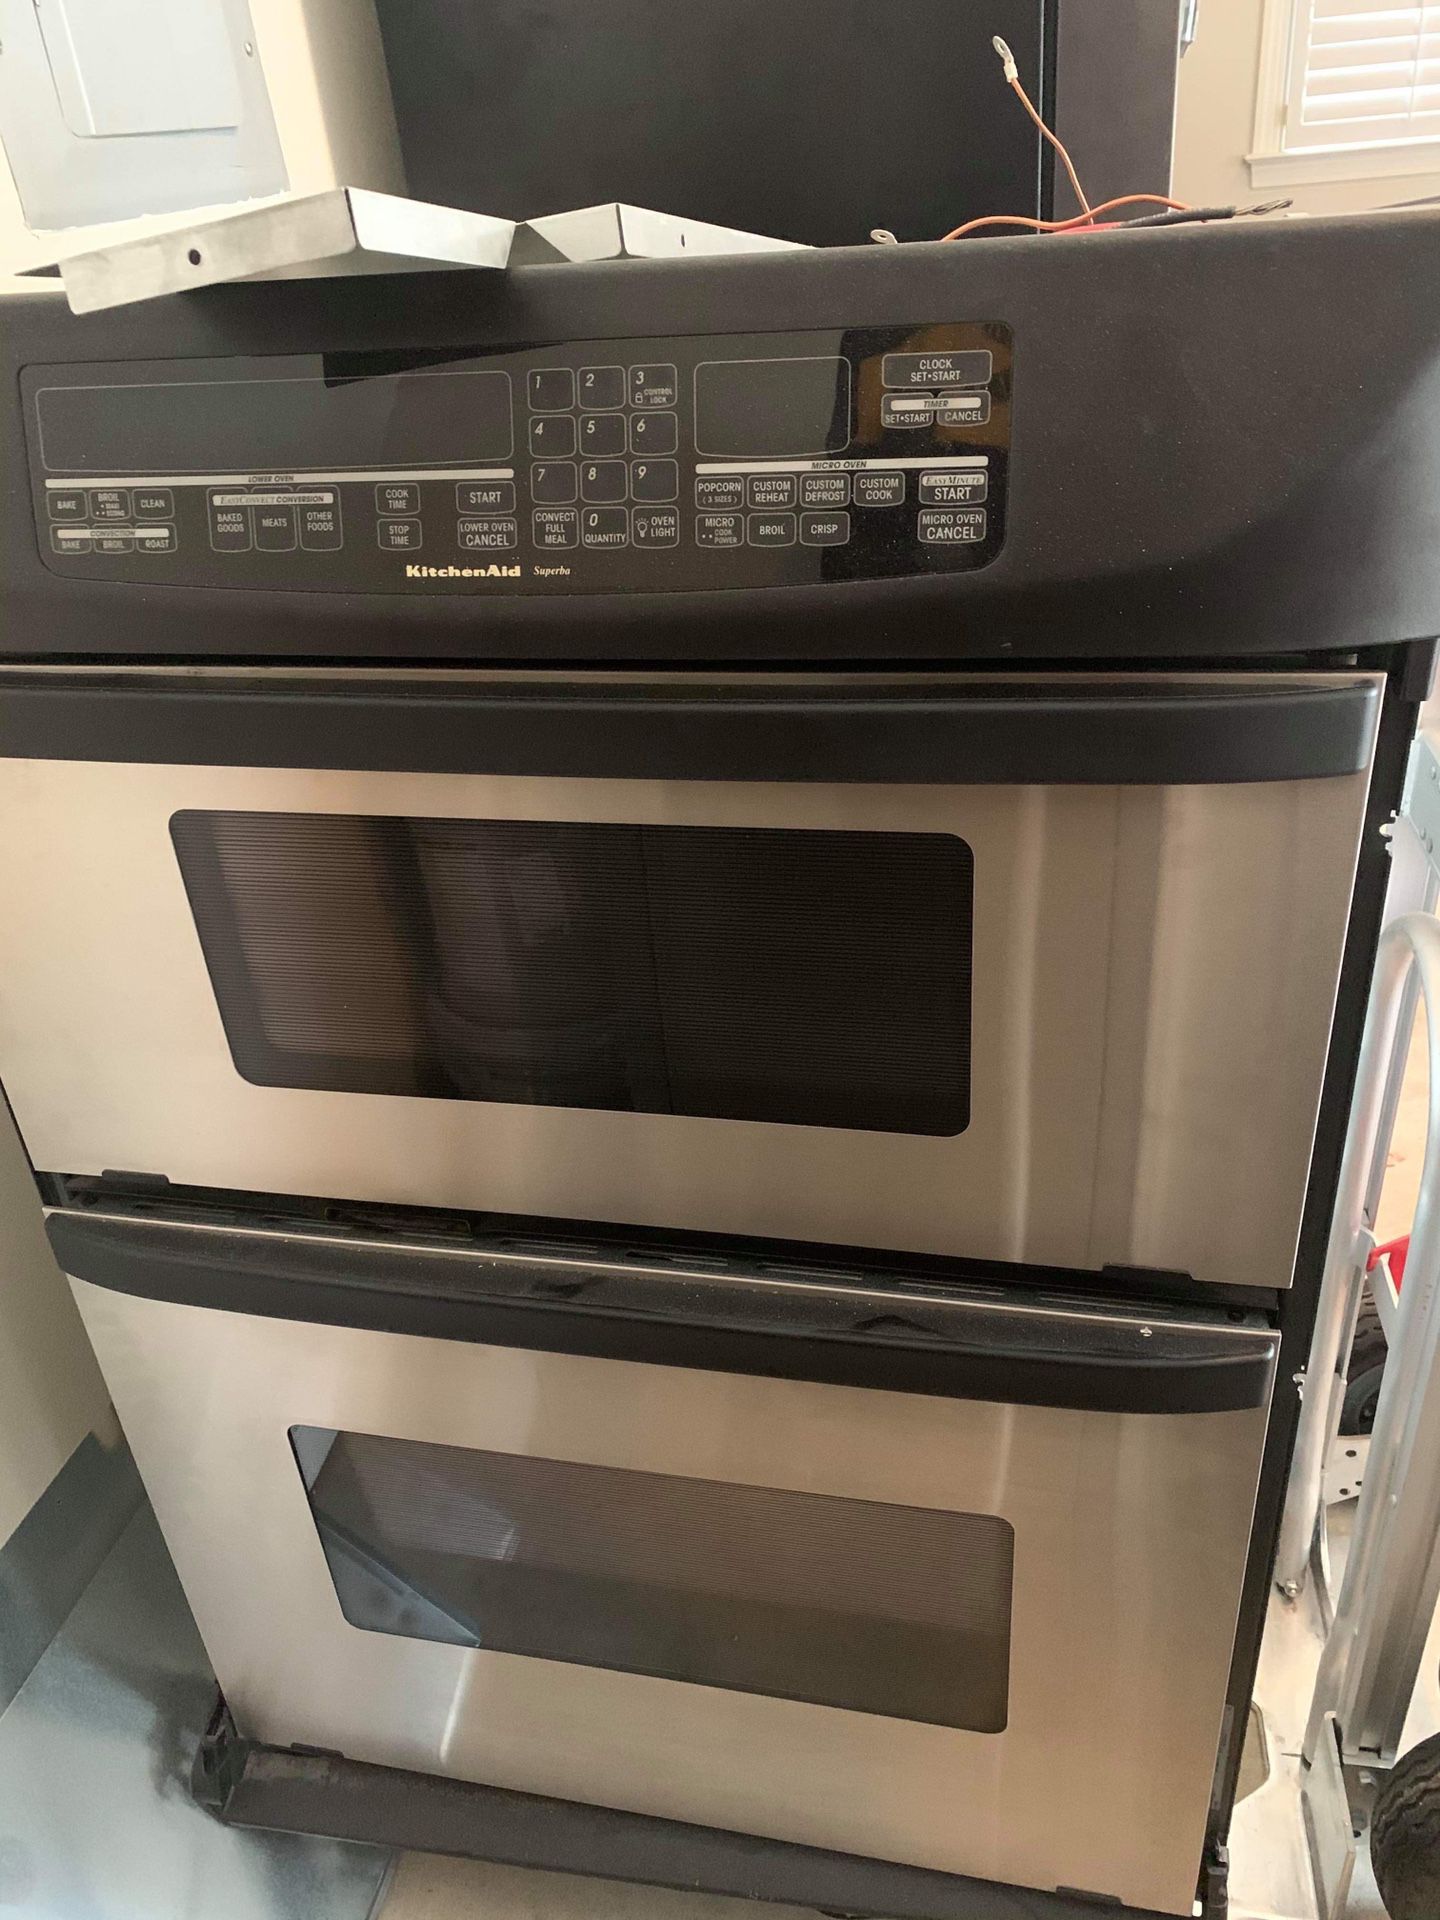 Selling wall oven kitchen aid with microwave/ convention oven.. works perfectly fine.